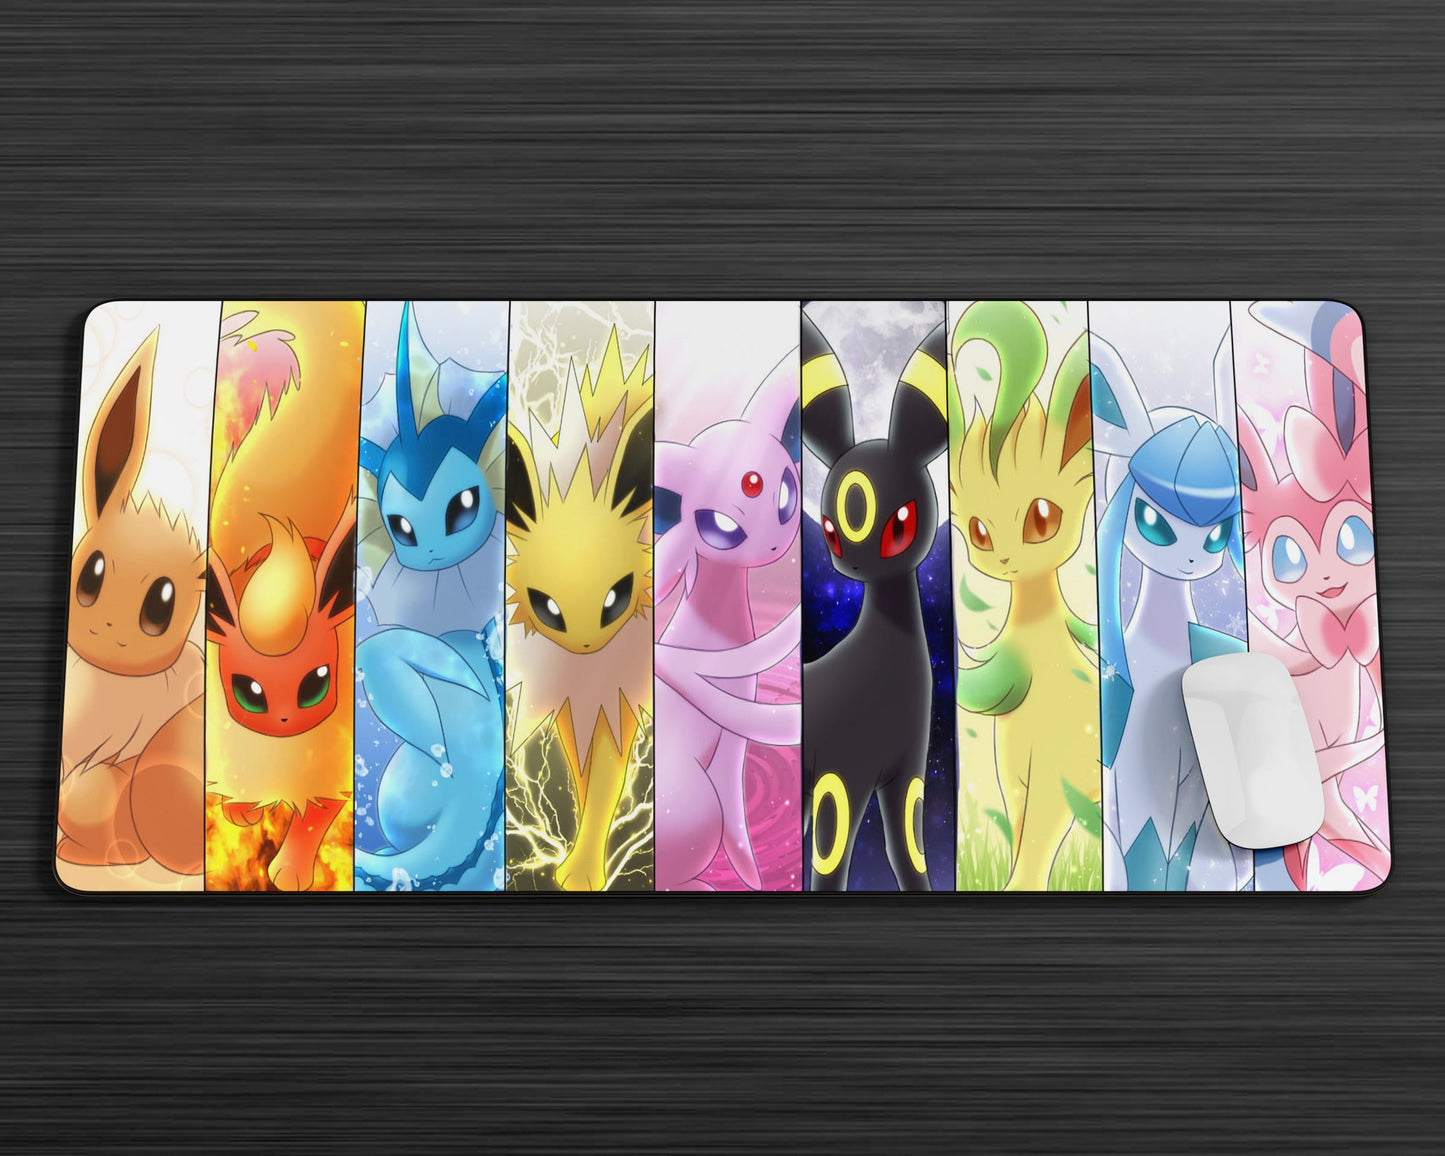 Anime Town Creations Mouse Pad Pokemon Eevee Evolution Gaming Mouse Pad Accessories - Anime Pokemon Gaming Mouse Pad